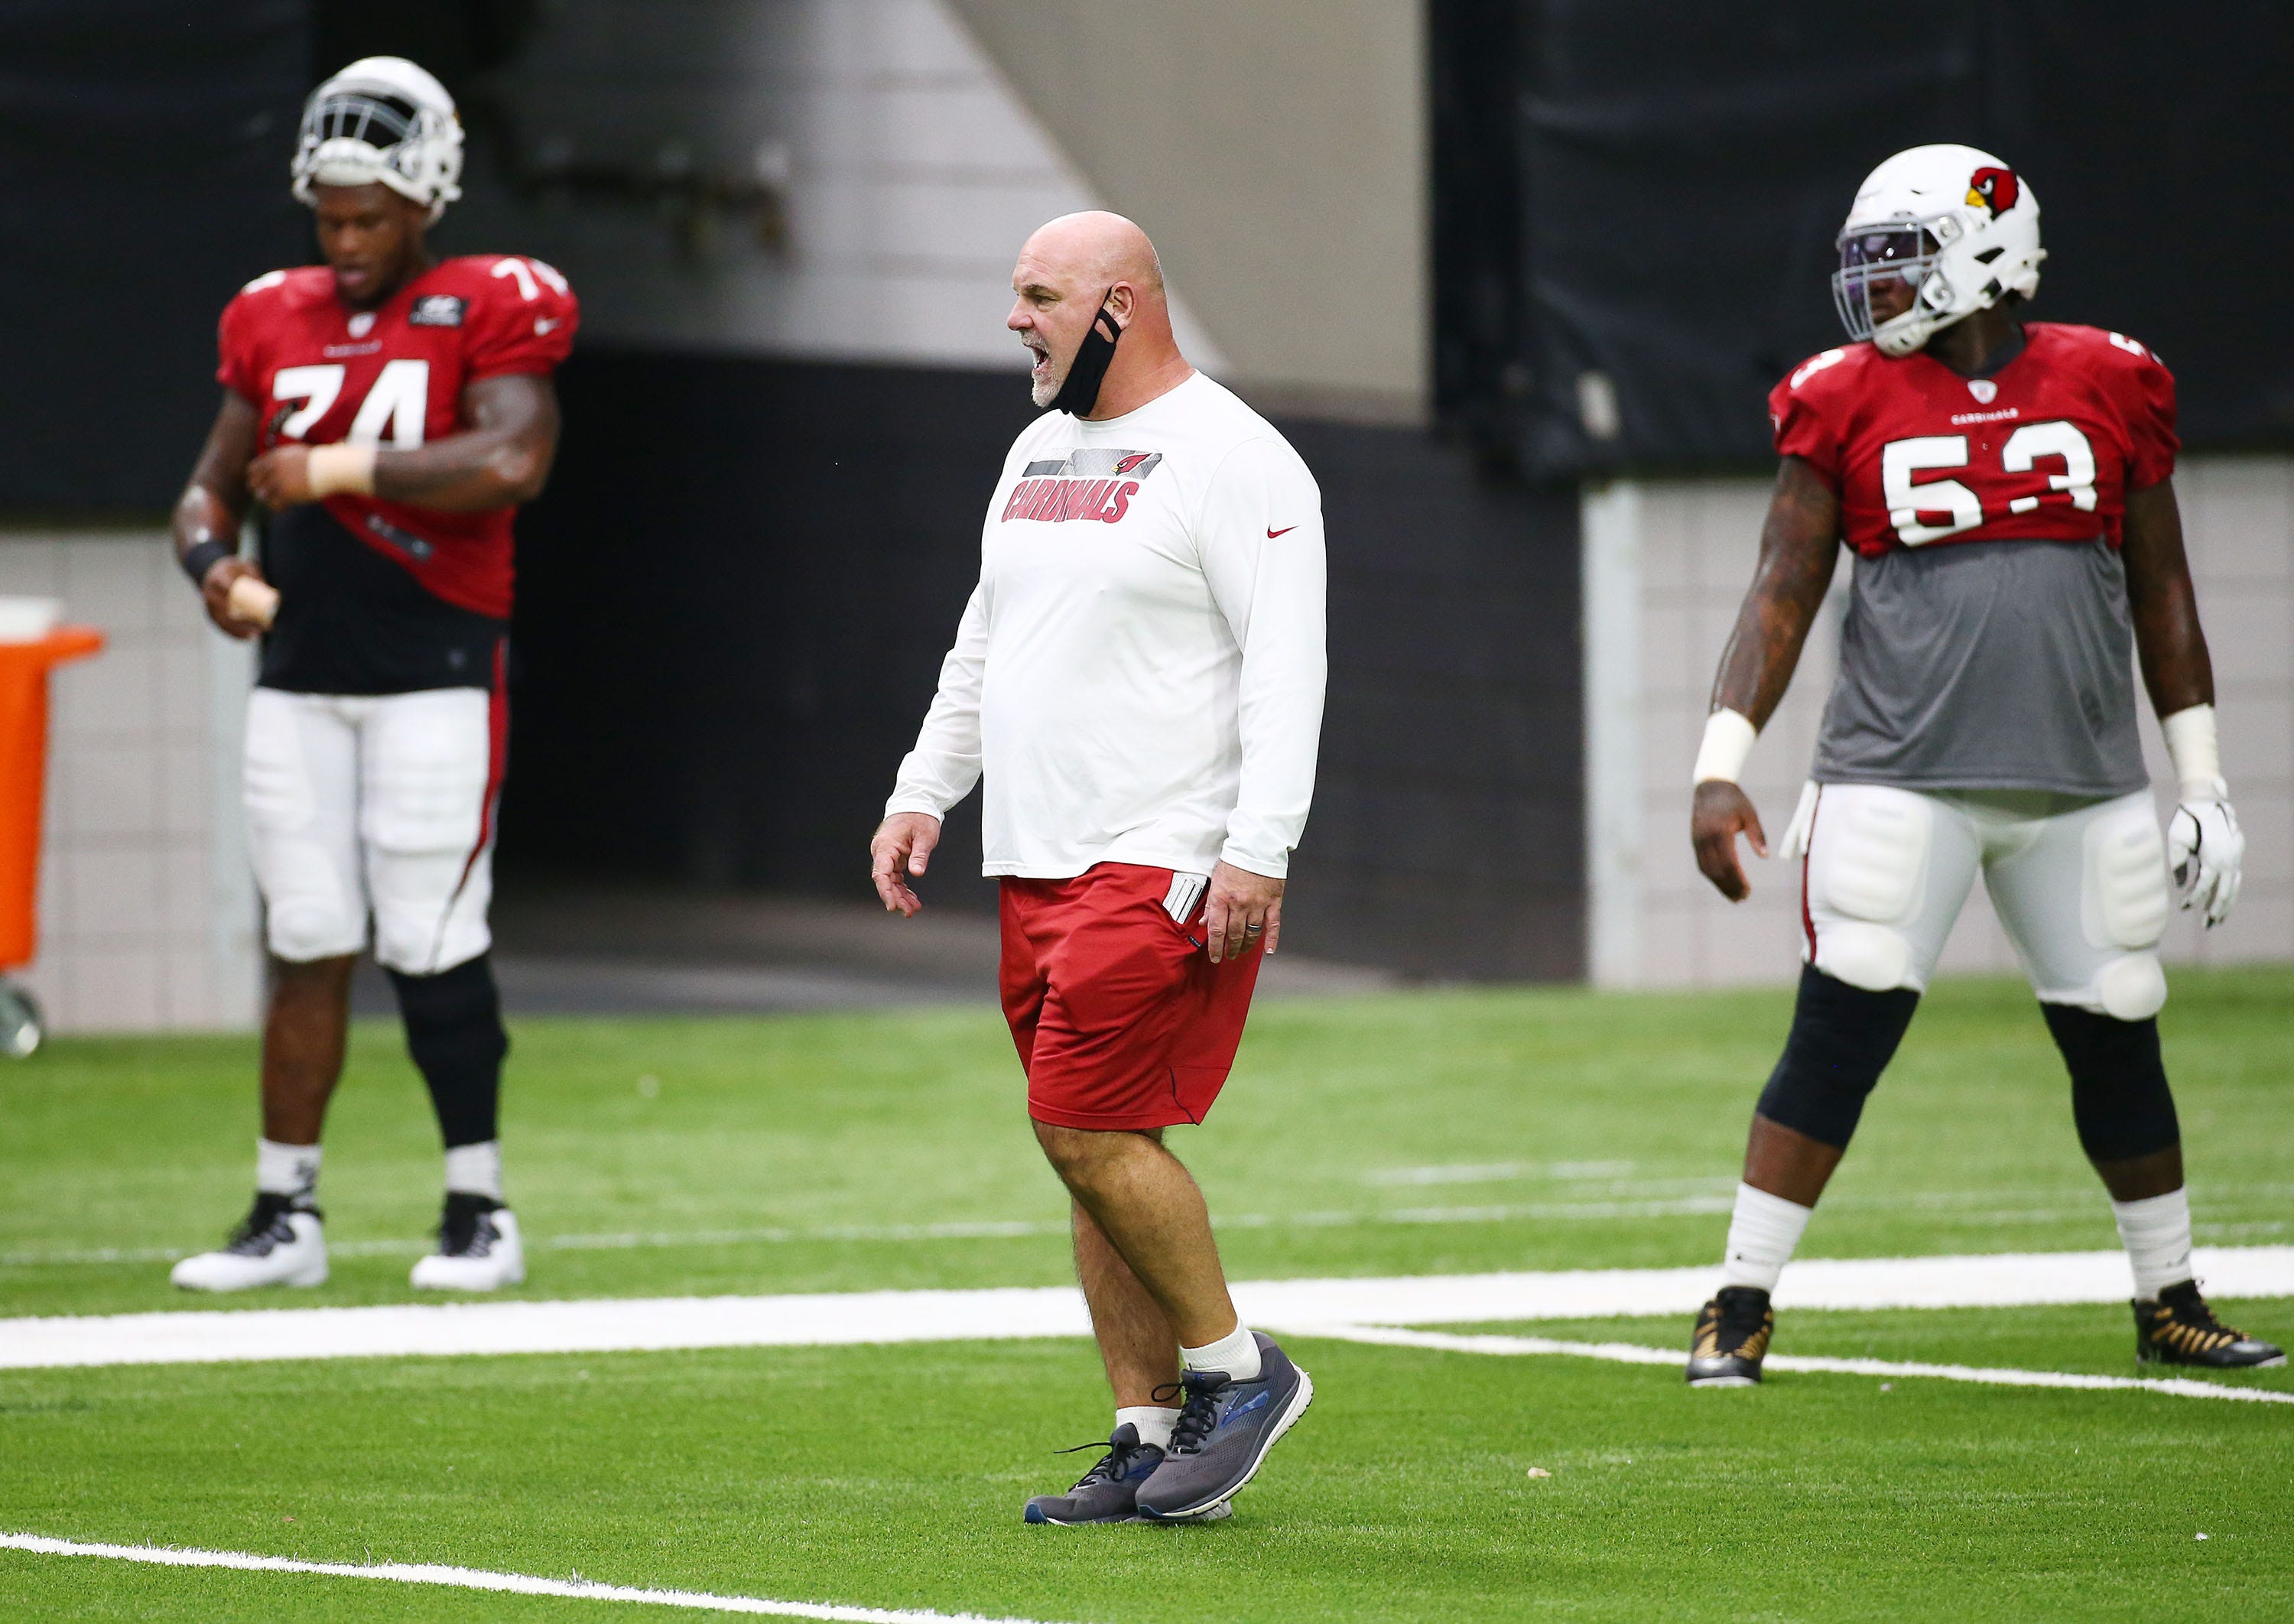 Sean Kugler's release was highlight from latest 'Hard Knocks' episode